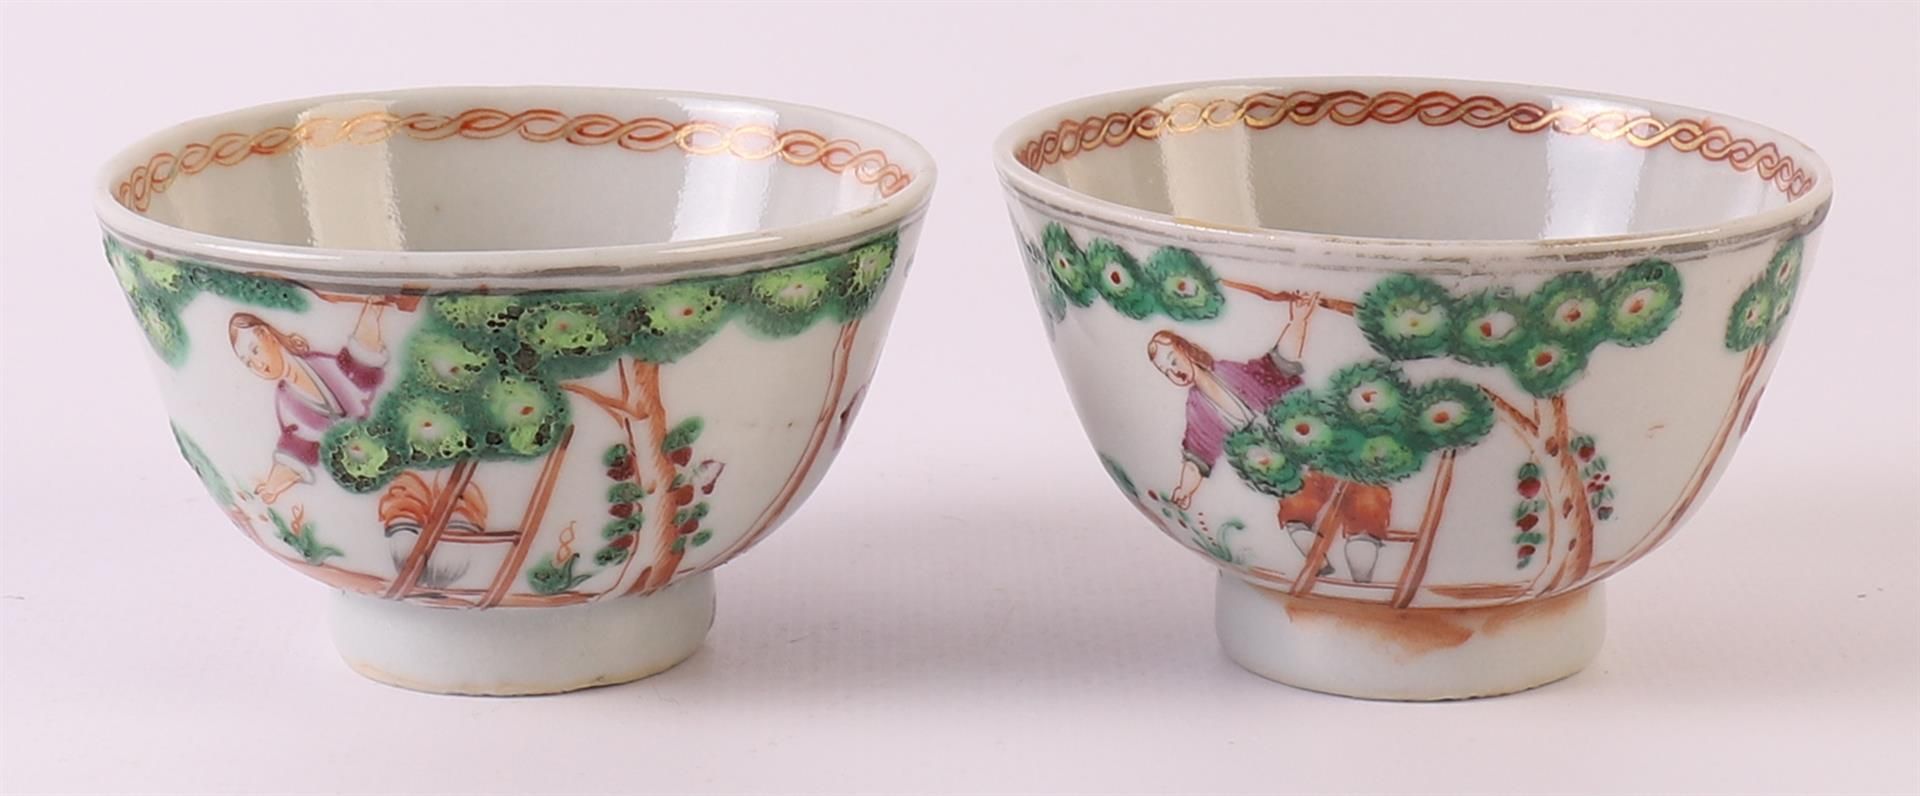 Four porcelain cups and accompanying saucers, Chine de Commande, China, Qianlong, 18th century. - Image 17 of 22